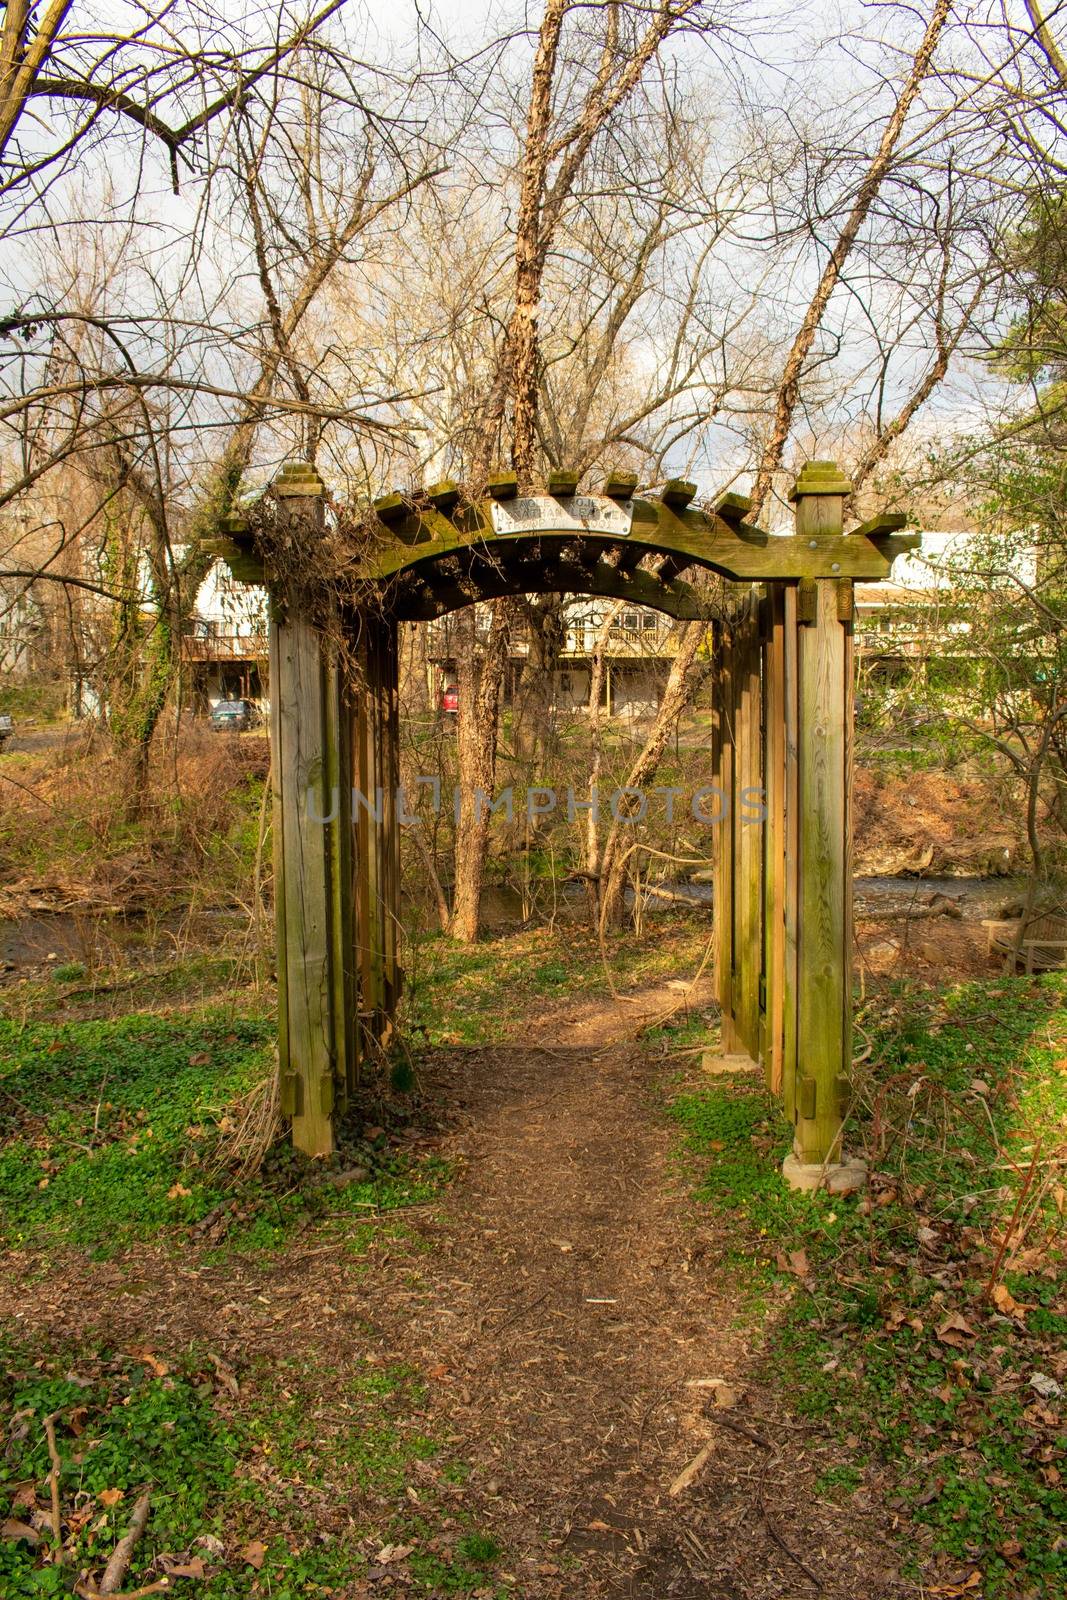 An Arbor in the Woods of a Park in Suburban Pennsylvania